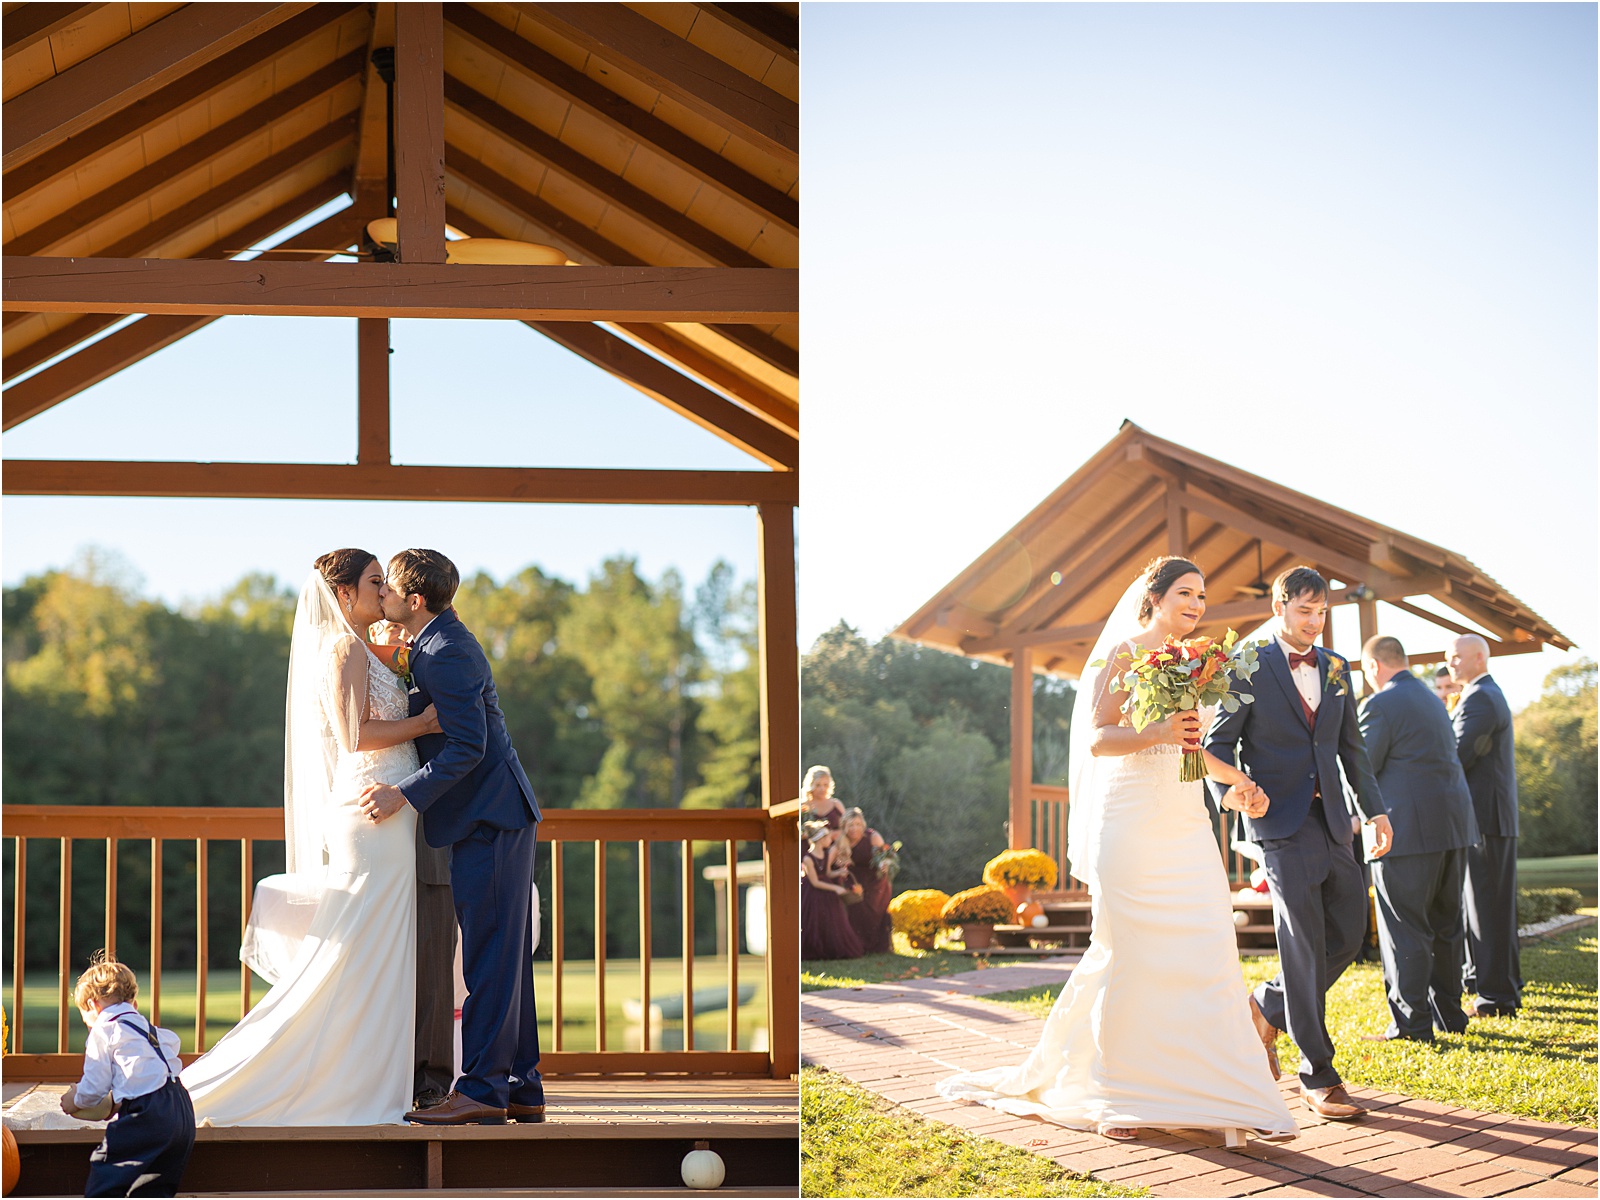 Couple shares their first kiss as a married couple at Columbia Barn Wedding venue